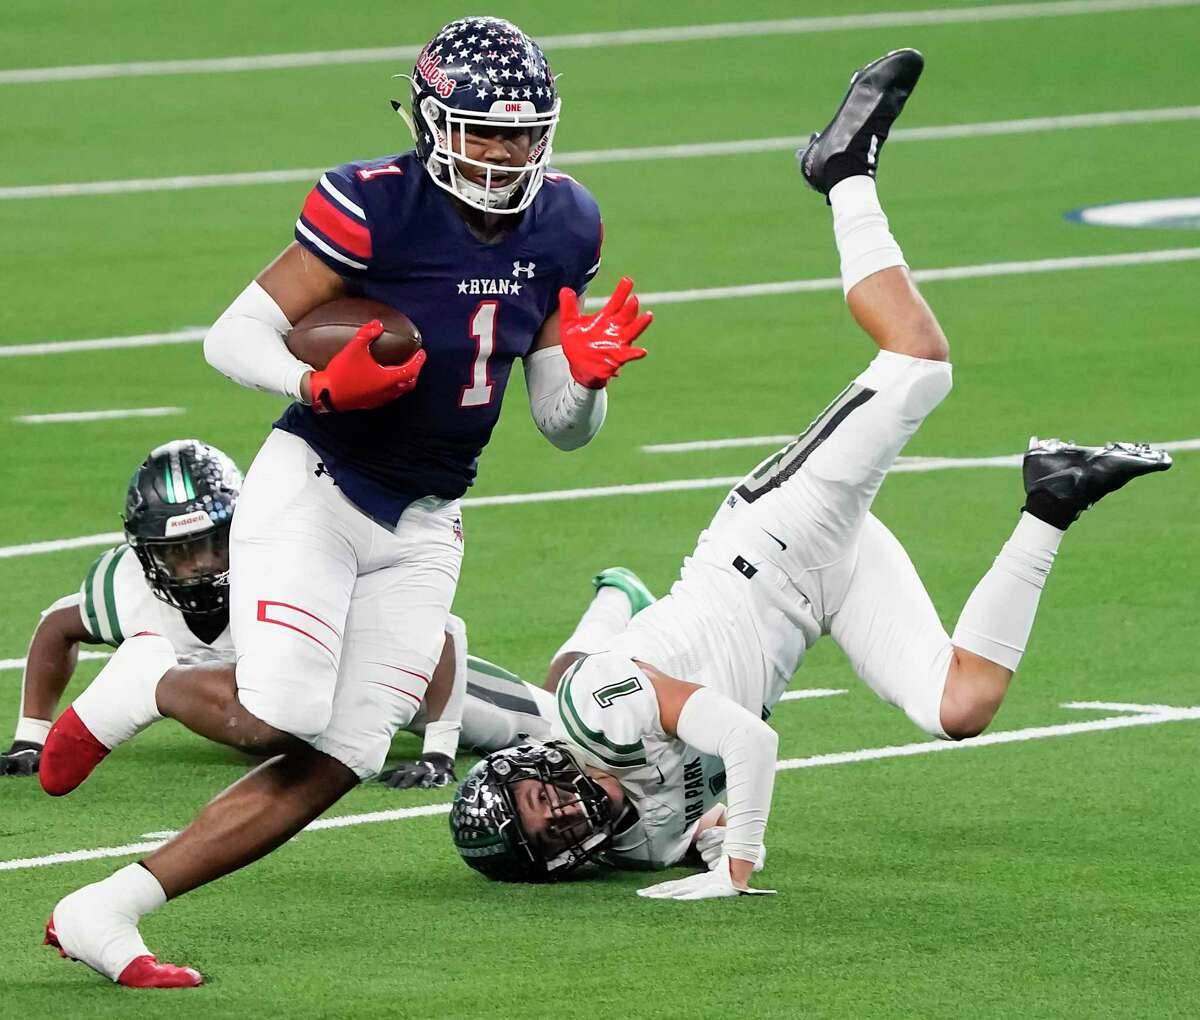 Denton Ryan wide receiver Ja'Tavion Sanders (1) gets past Cedar Park defensive back Cody Marshall during the first half of the Class 5A Division I Texas state football championship game at AT&T Stadium on Friday, Jan. 15, 2021, in Arlington, Texas. (Smiley N. Pool/The Dallas Morning News)